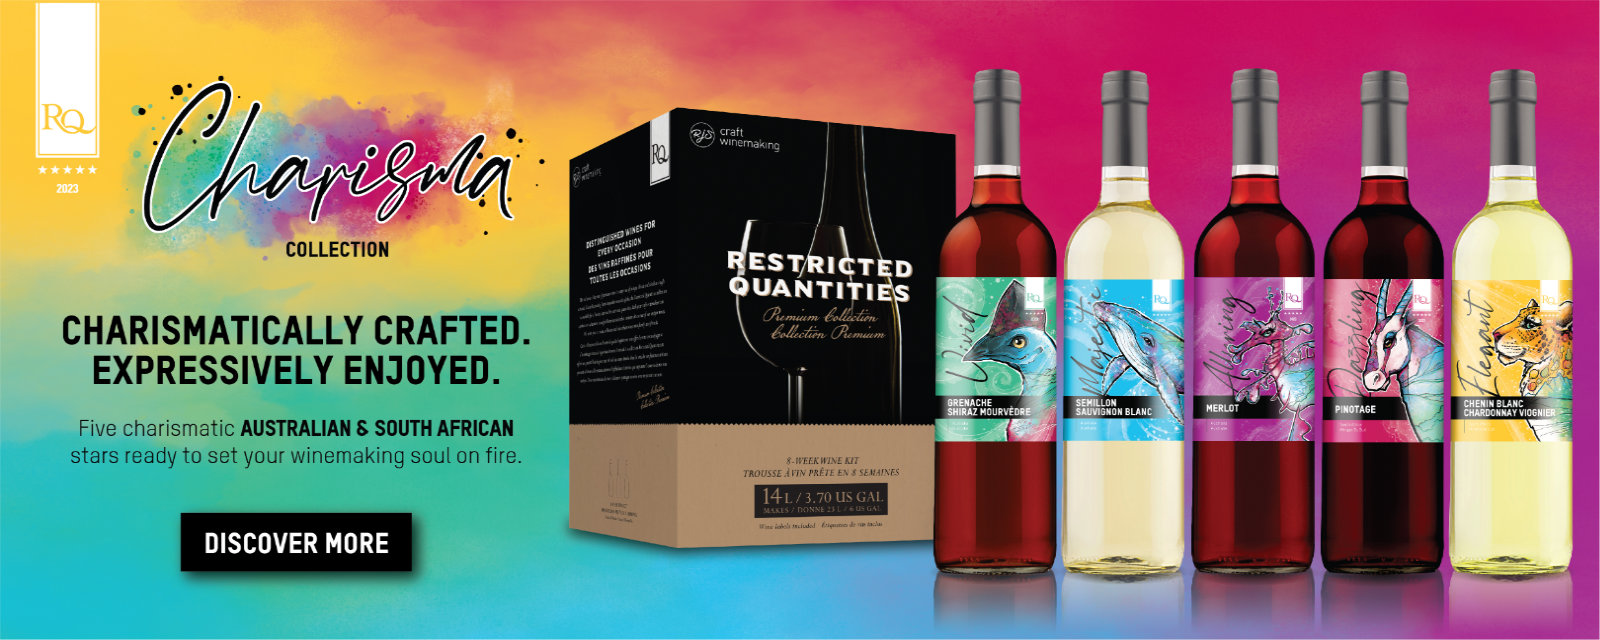 Restricted Quanities Wines